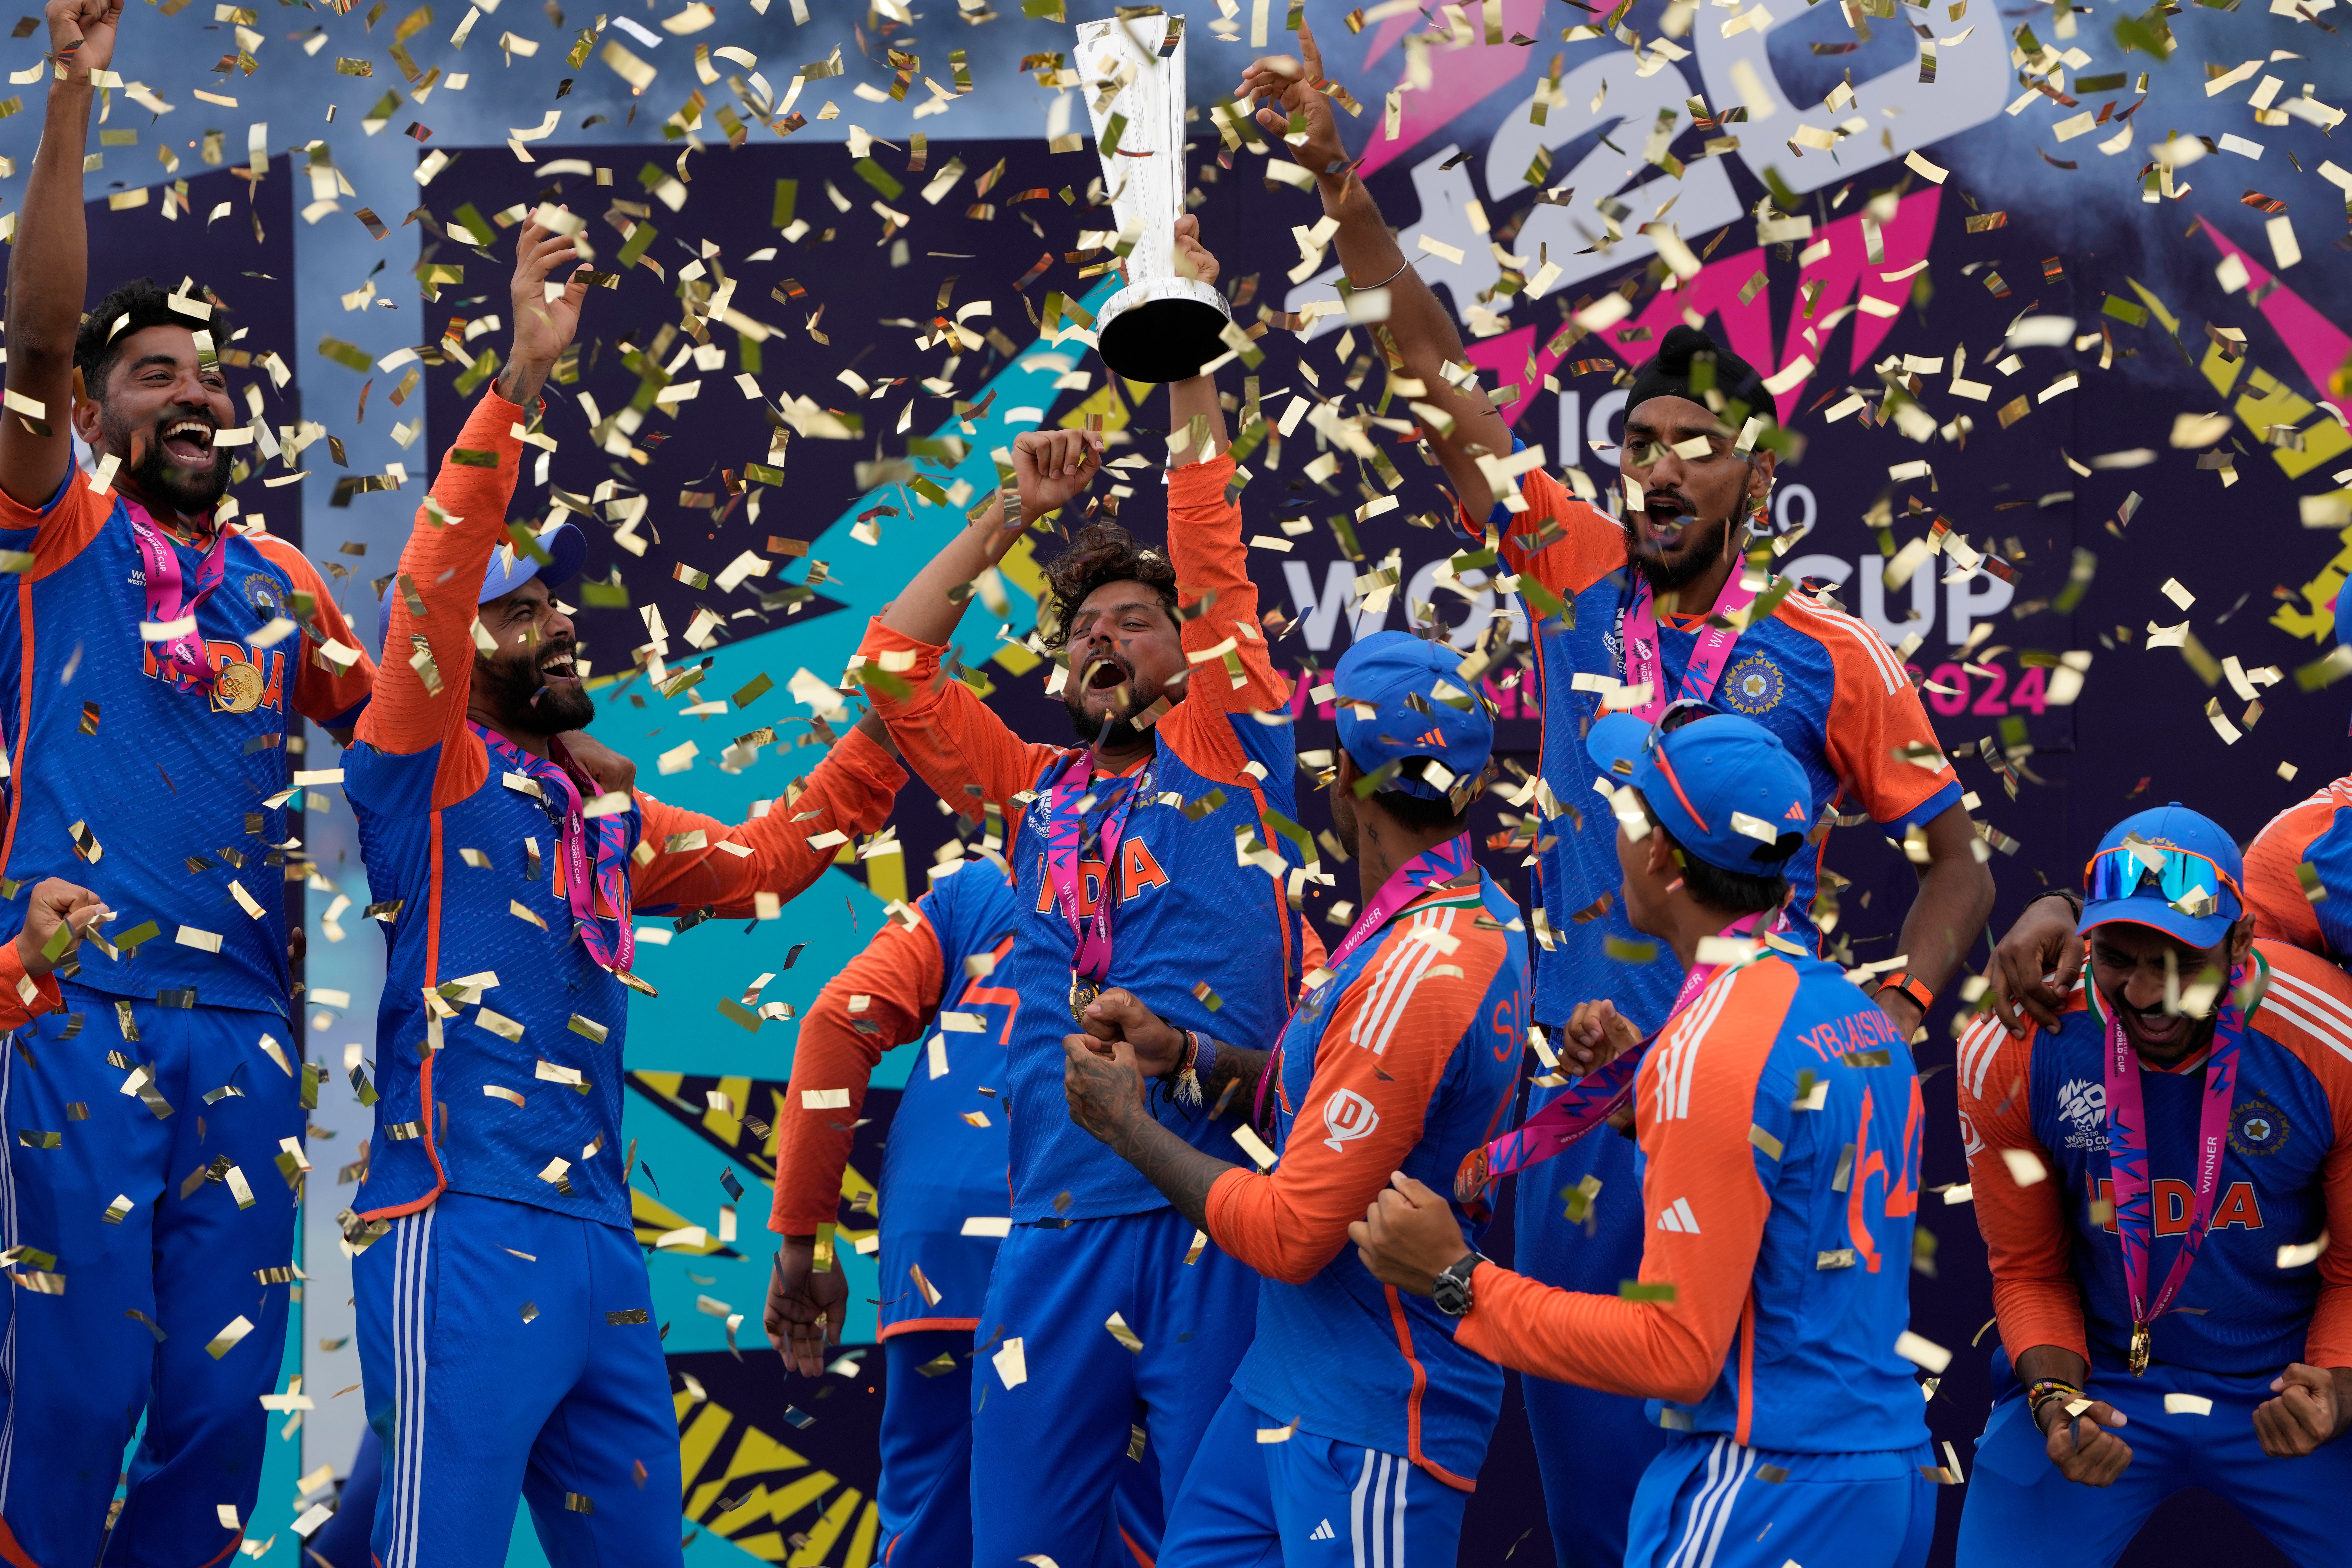 India lift the T20 World Cup trophy as tickertape falls